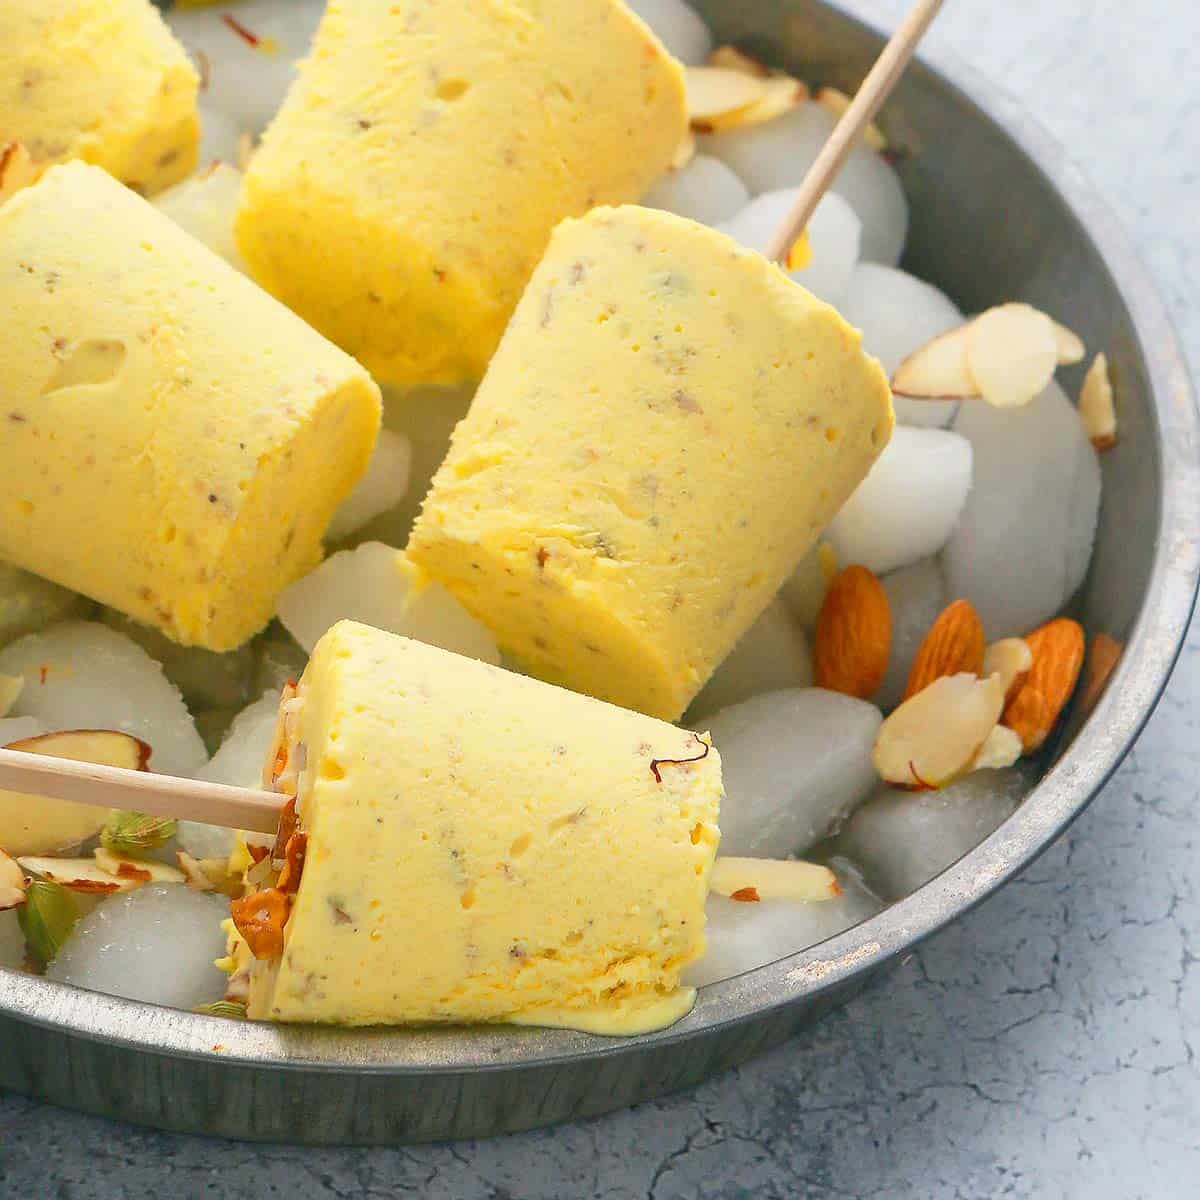 Badam Kulfi placed on a tray filled with ice